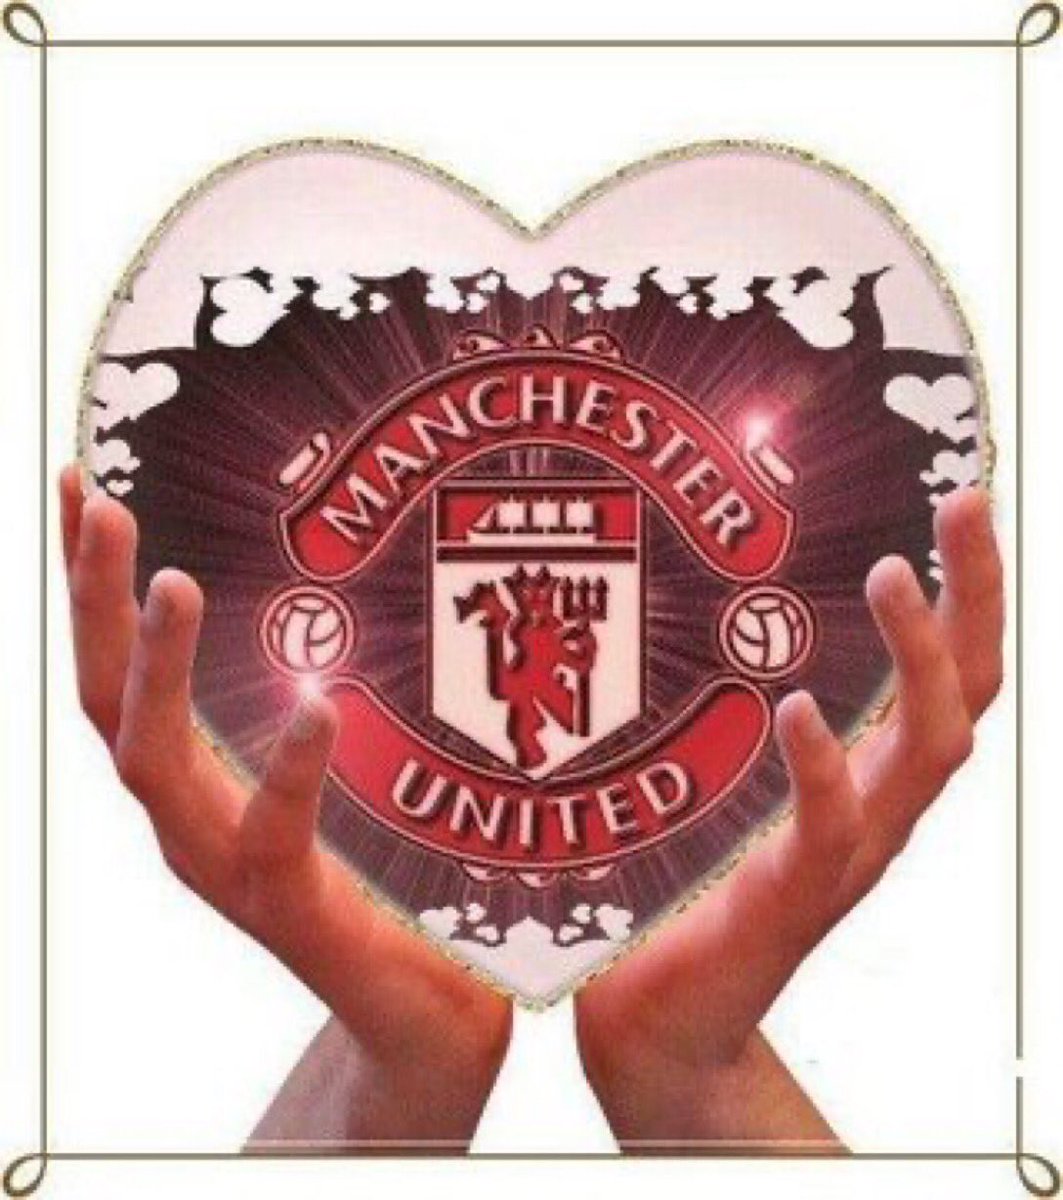 For every true United fan, match going or waking up at 
unGodly hour see our beloved club play we share the same heartbeat. To the haters 🖕🏾🖕🏾🖕🏾🖕🏾🖕🏾One love respectively MrIslandMan in SoFlo